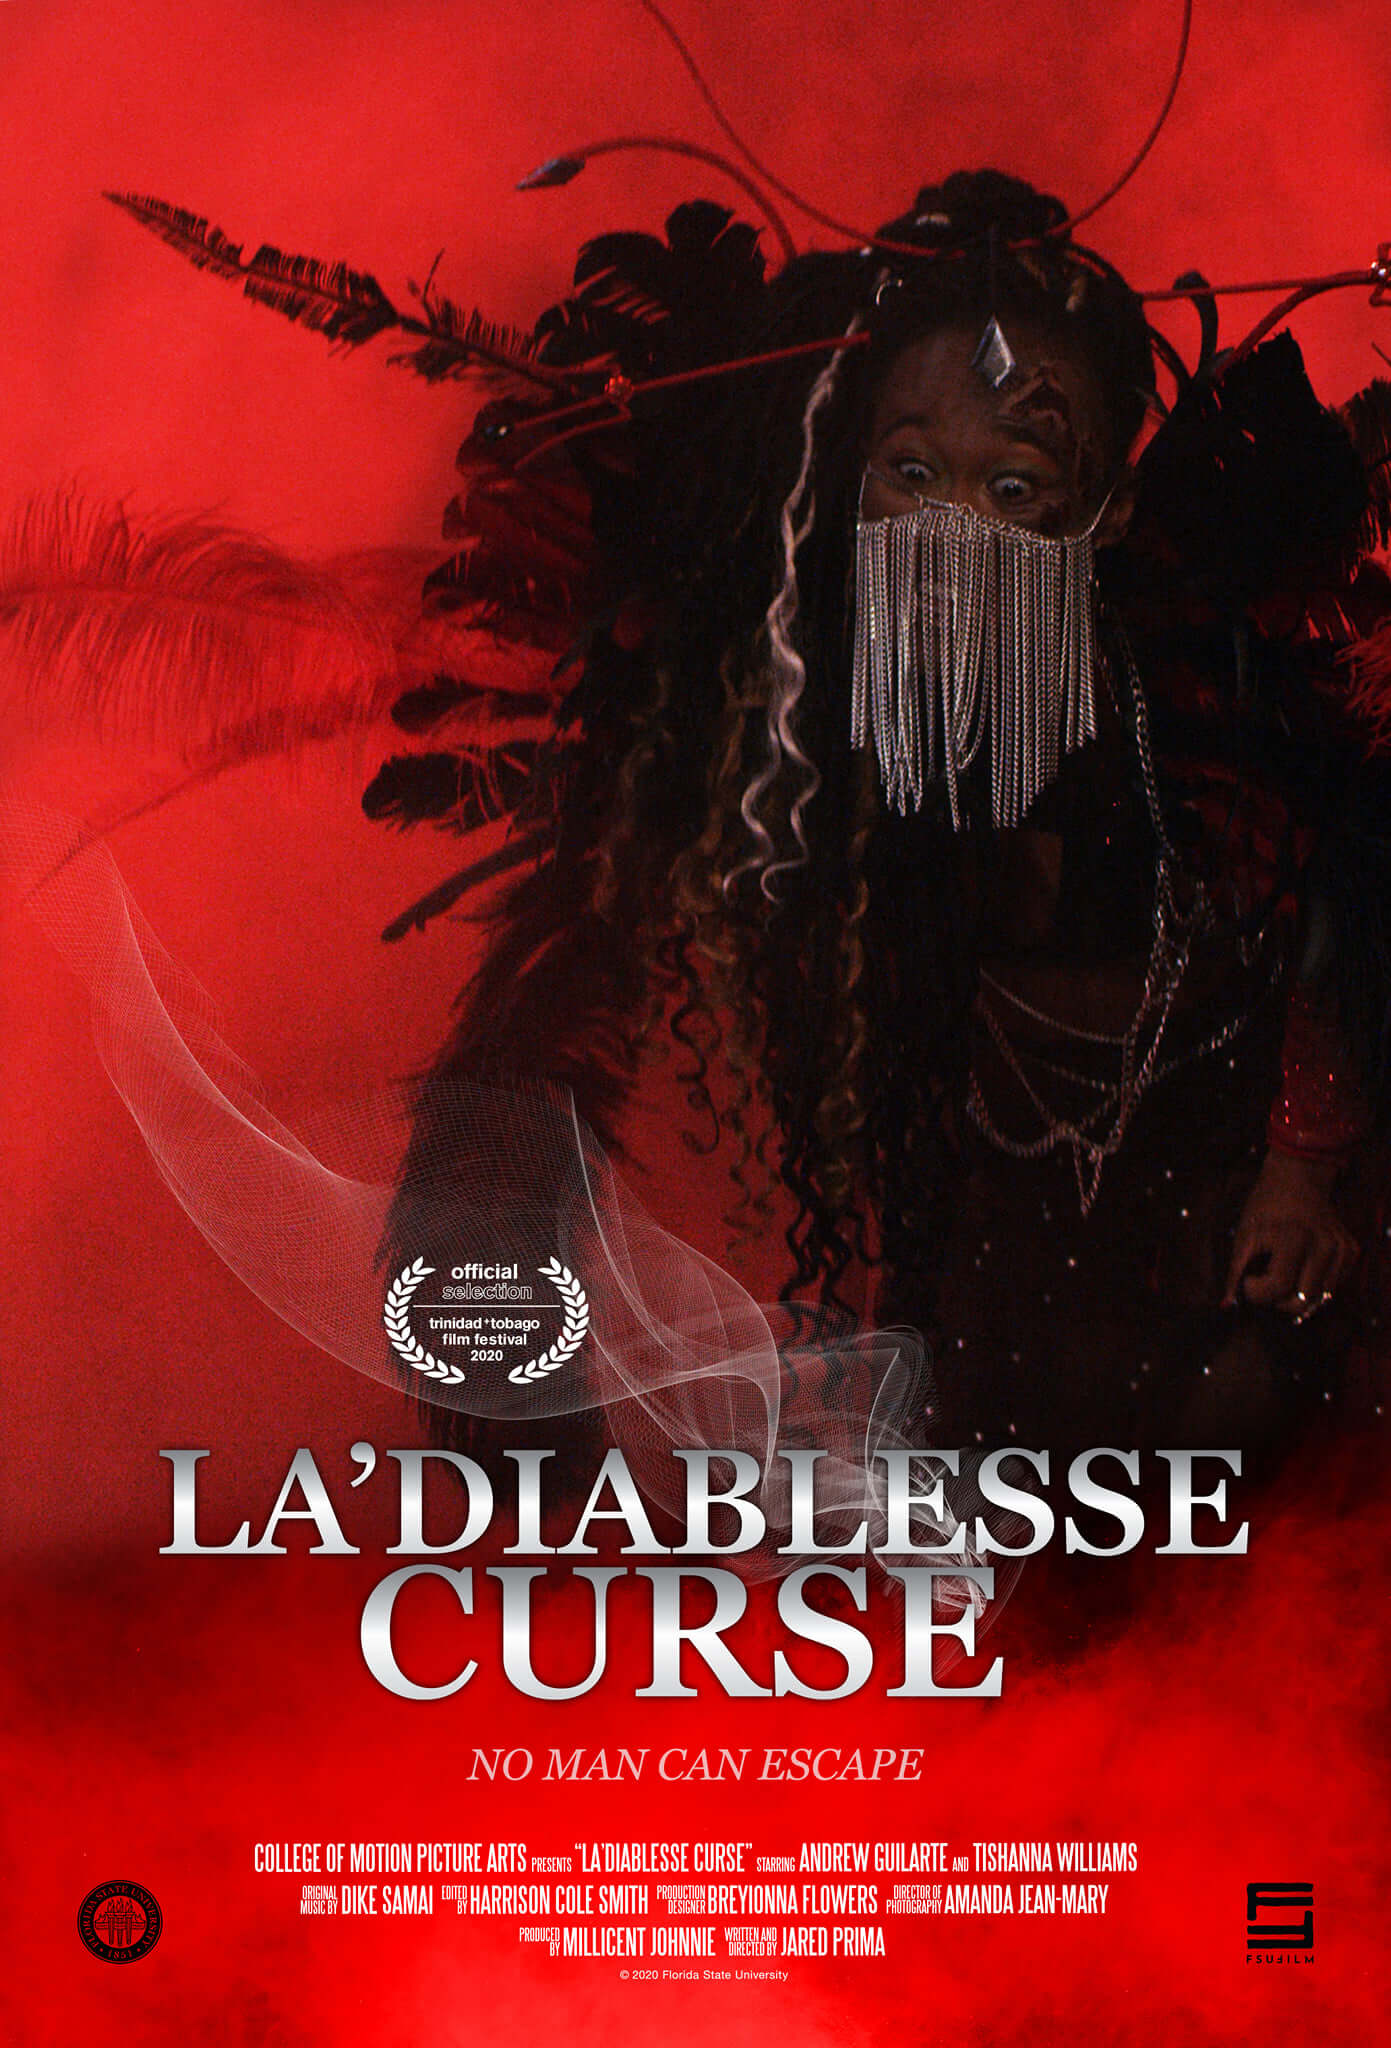 LADIABLESSE CURSE POSTER